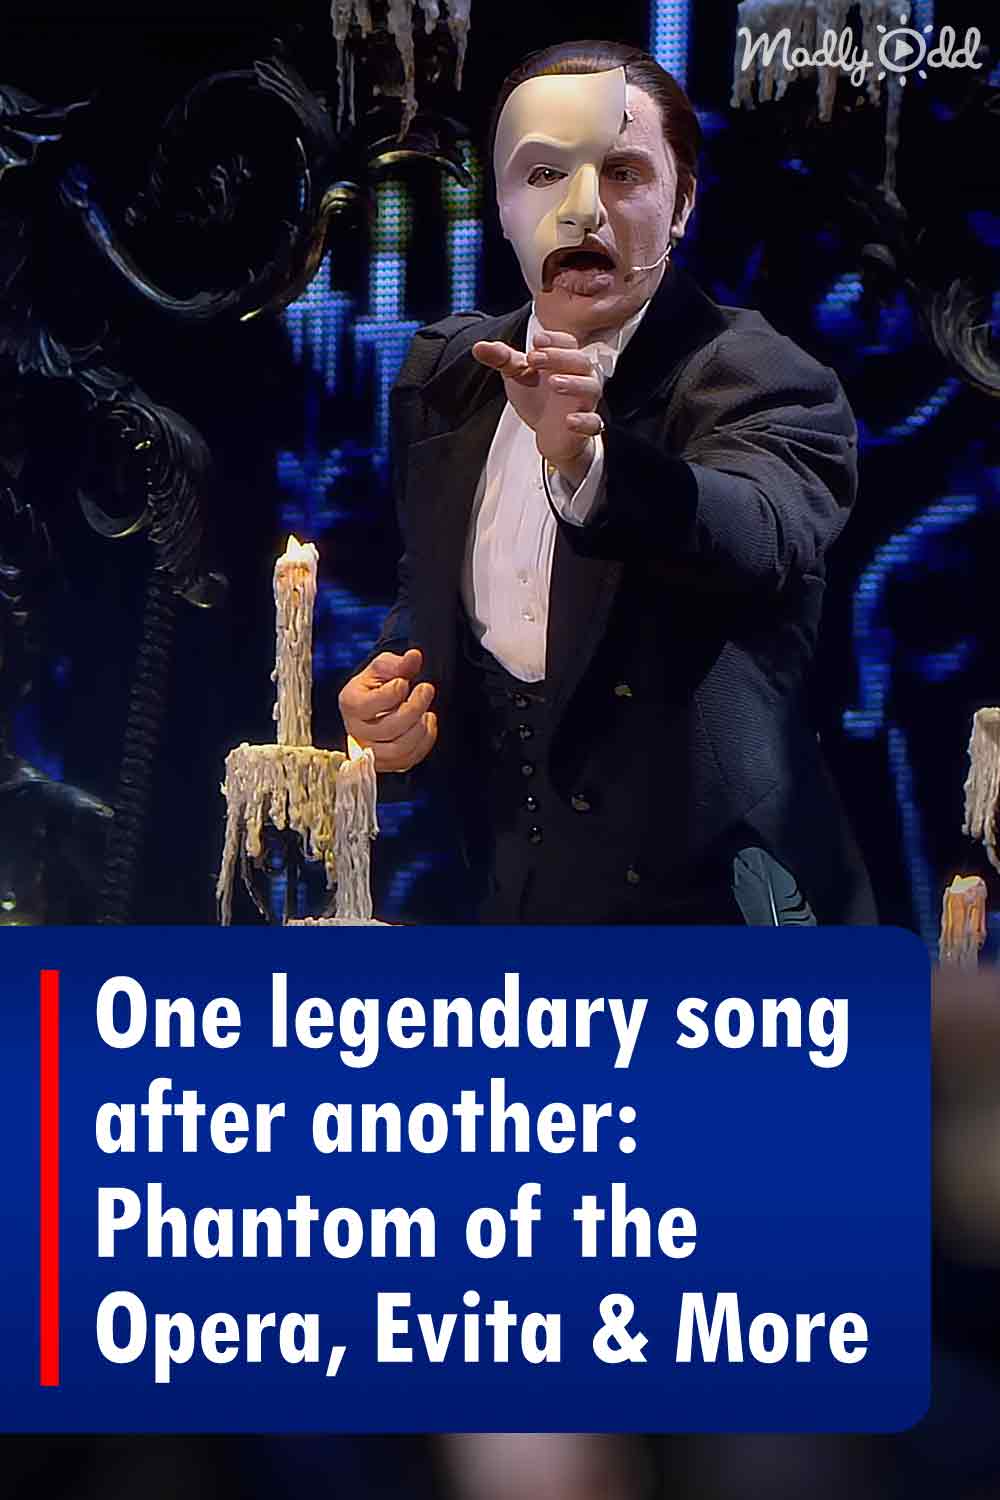 One legendary song after another: Phantom of the Opera, Evita & More